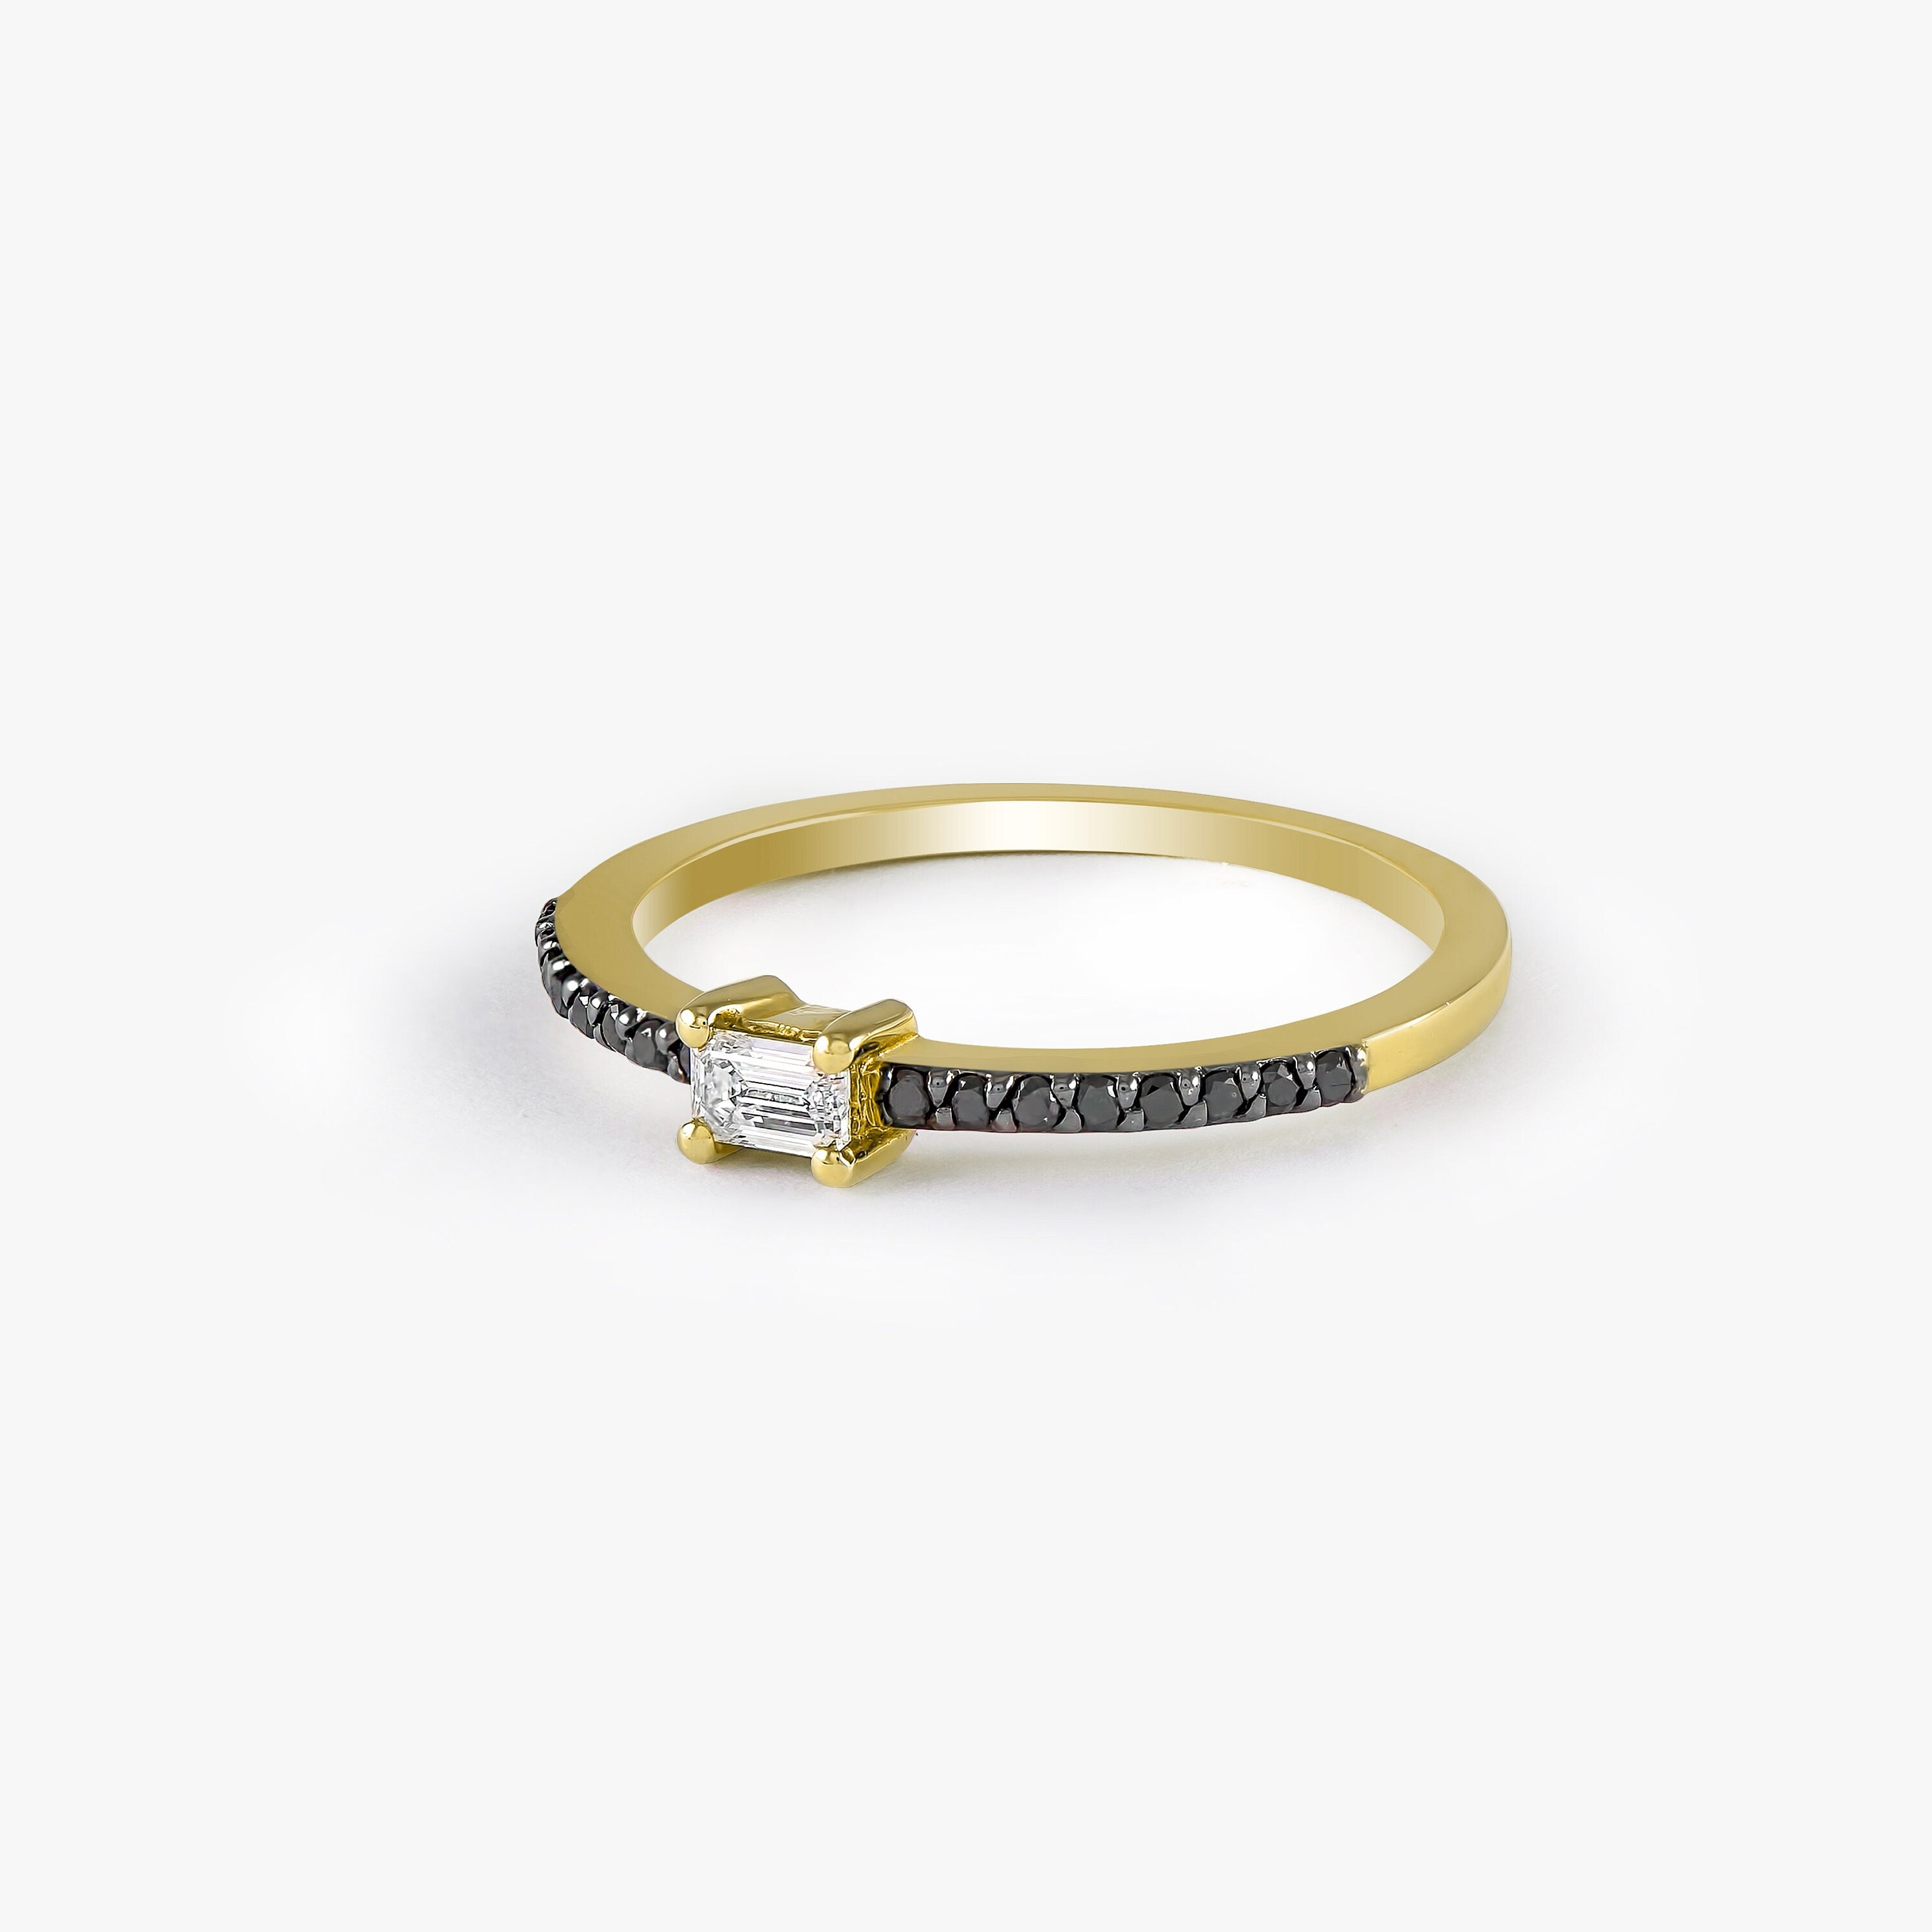 Black and White Diamond Stacking Ring in 14K Gold